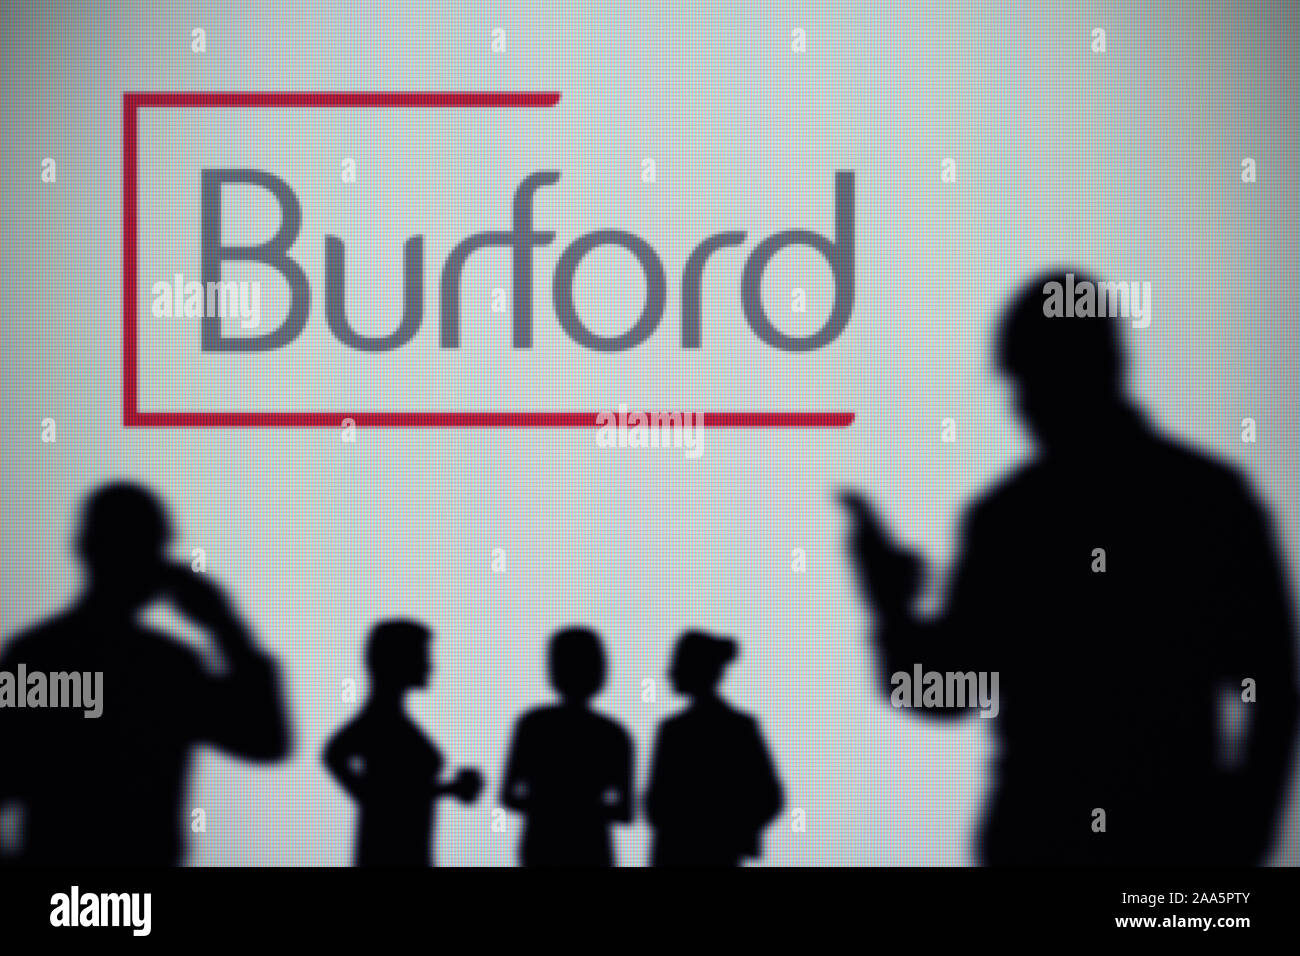 The Burford Capital logo is seen on an LED screen in the background while a silhouetted person uses a smartphone (Editorial use only) Stock Photo